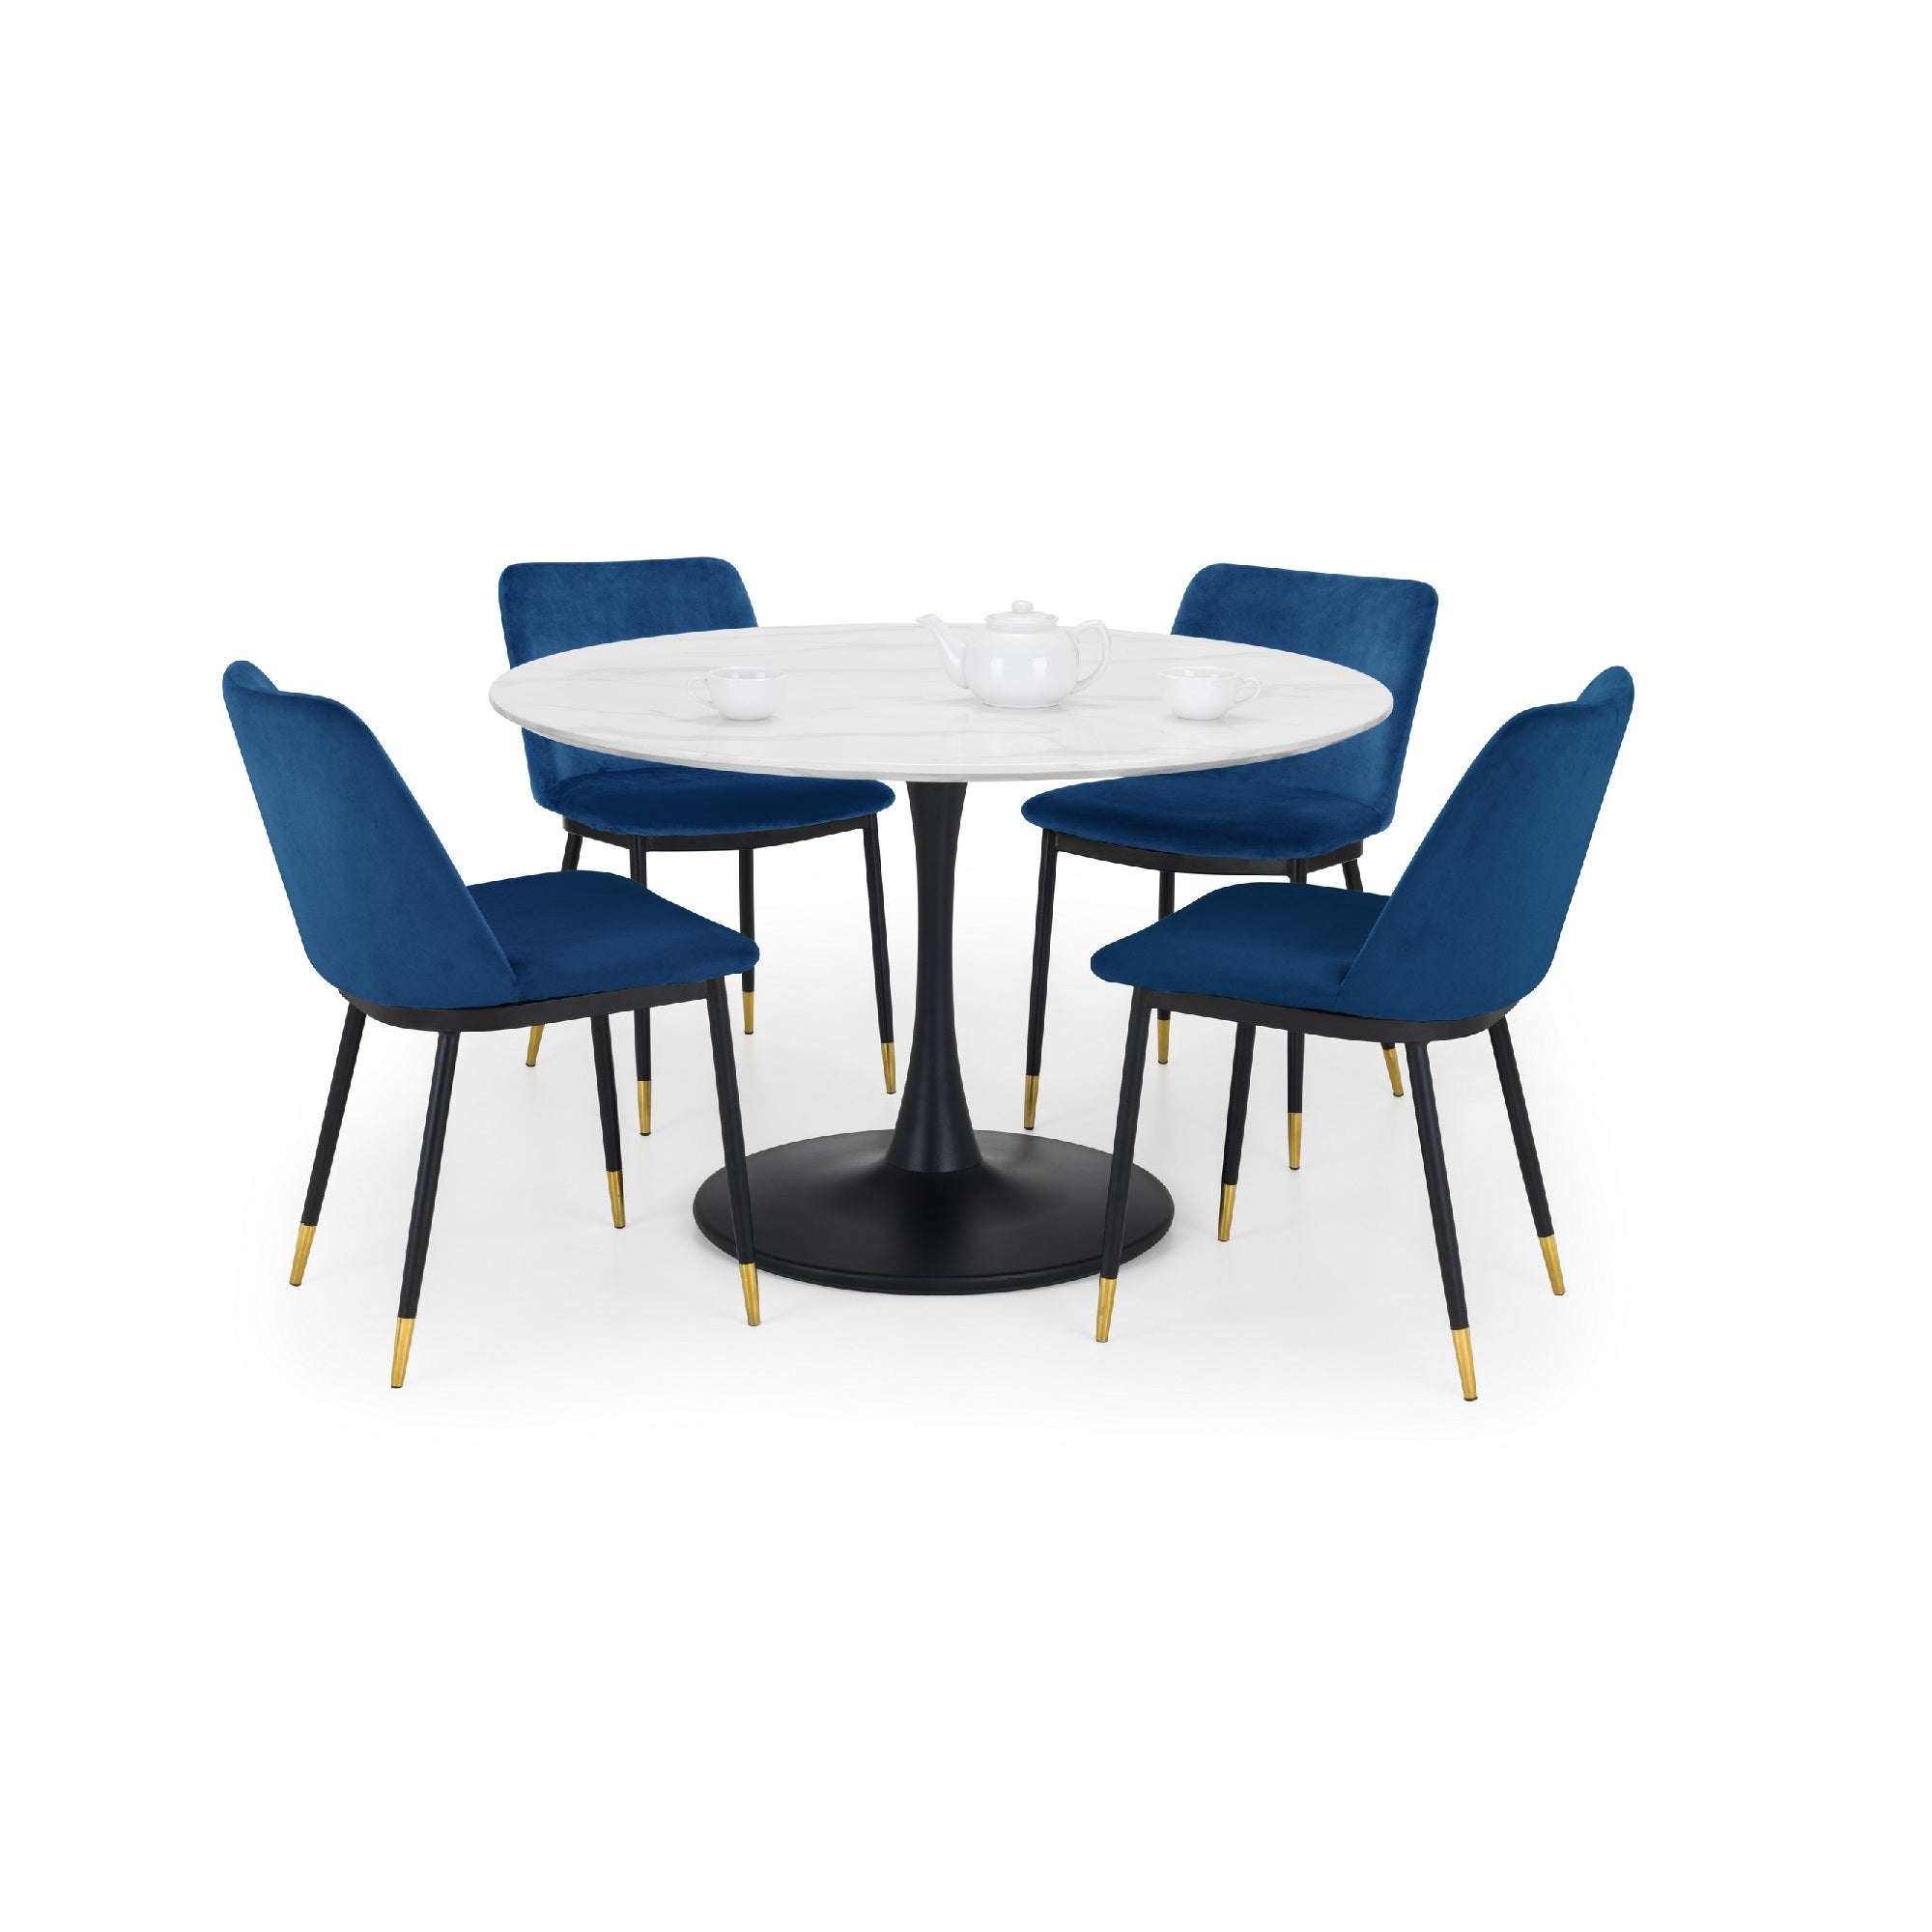 Holland Round Pedestal Dining Table With 4 Delaunay Chairs Blue